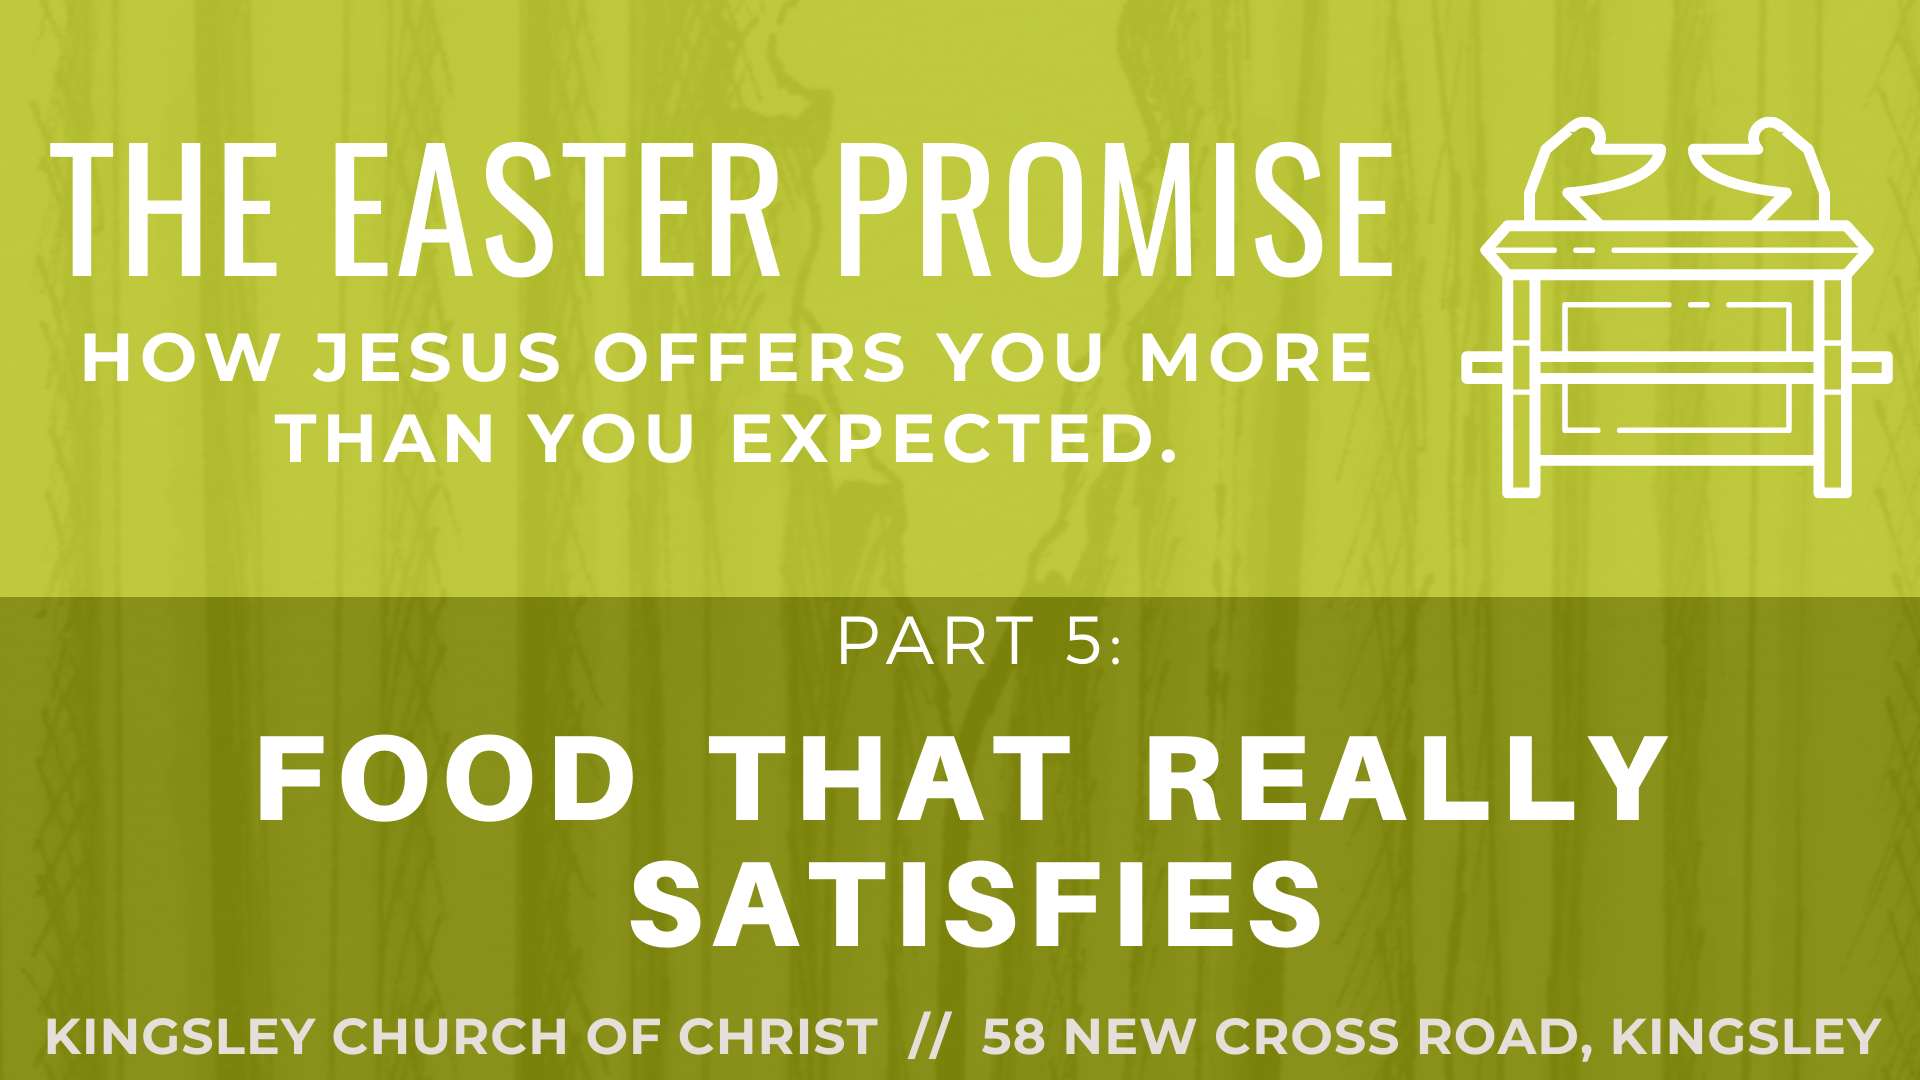 The Easter Promise pt 5 - Food that Really Satisfies